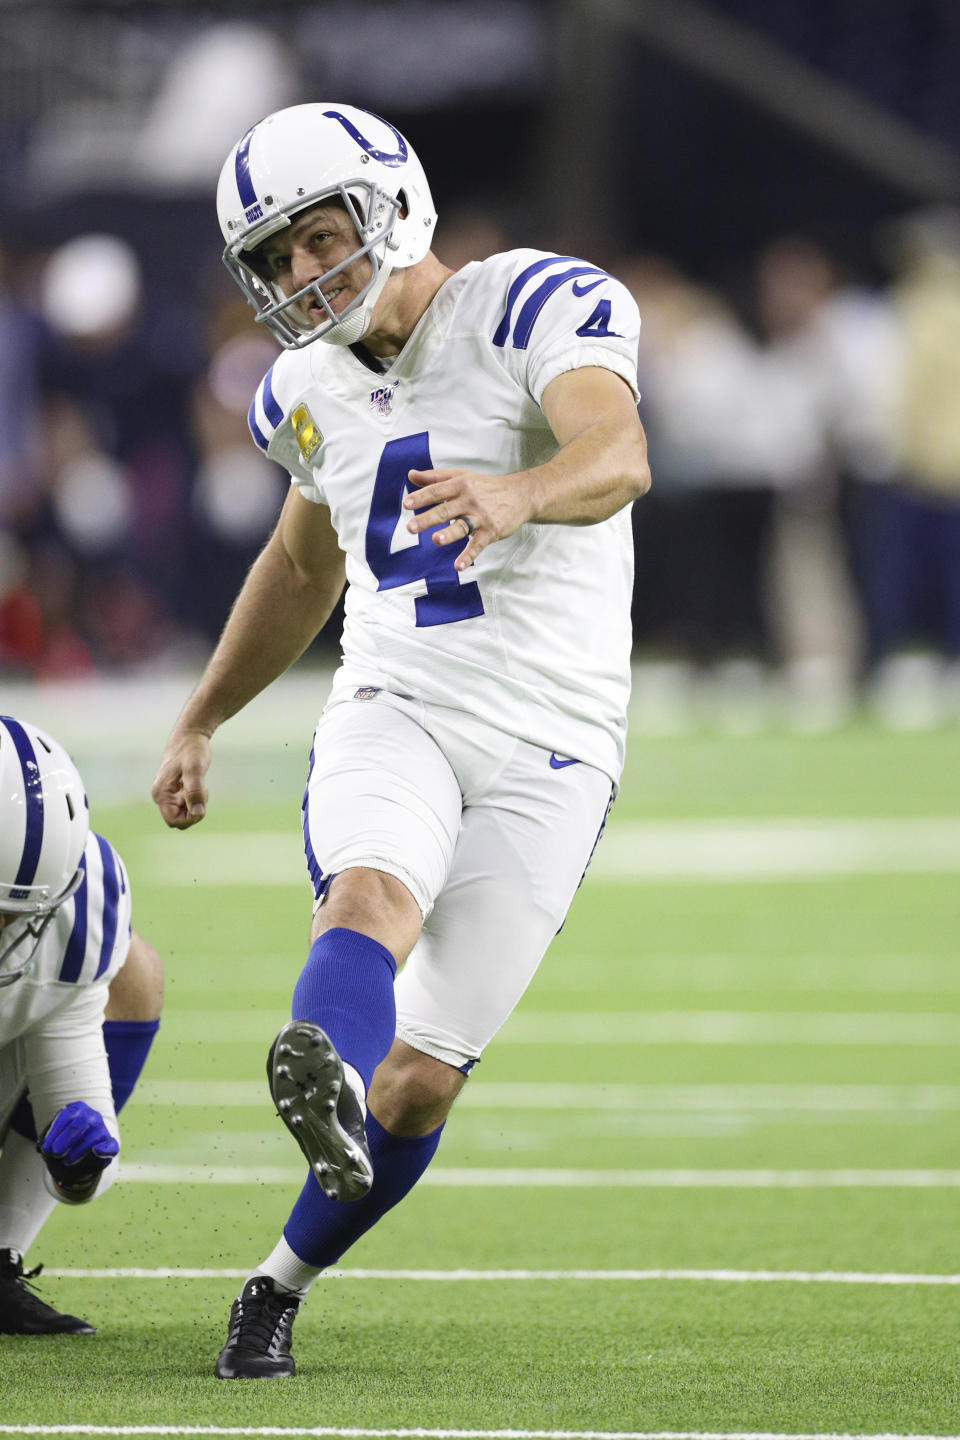 Indianapolis Colts kicker Adam Vinatieri (4) kicks a field goal during warm-ups in an NFL game against the Houston Texans, Thursday, Nov. 21, 2019 in Houston. The Texans defeated the Colts 20-17. (Margaret Bowles via AP)